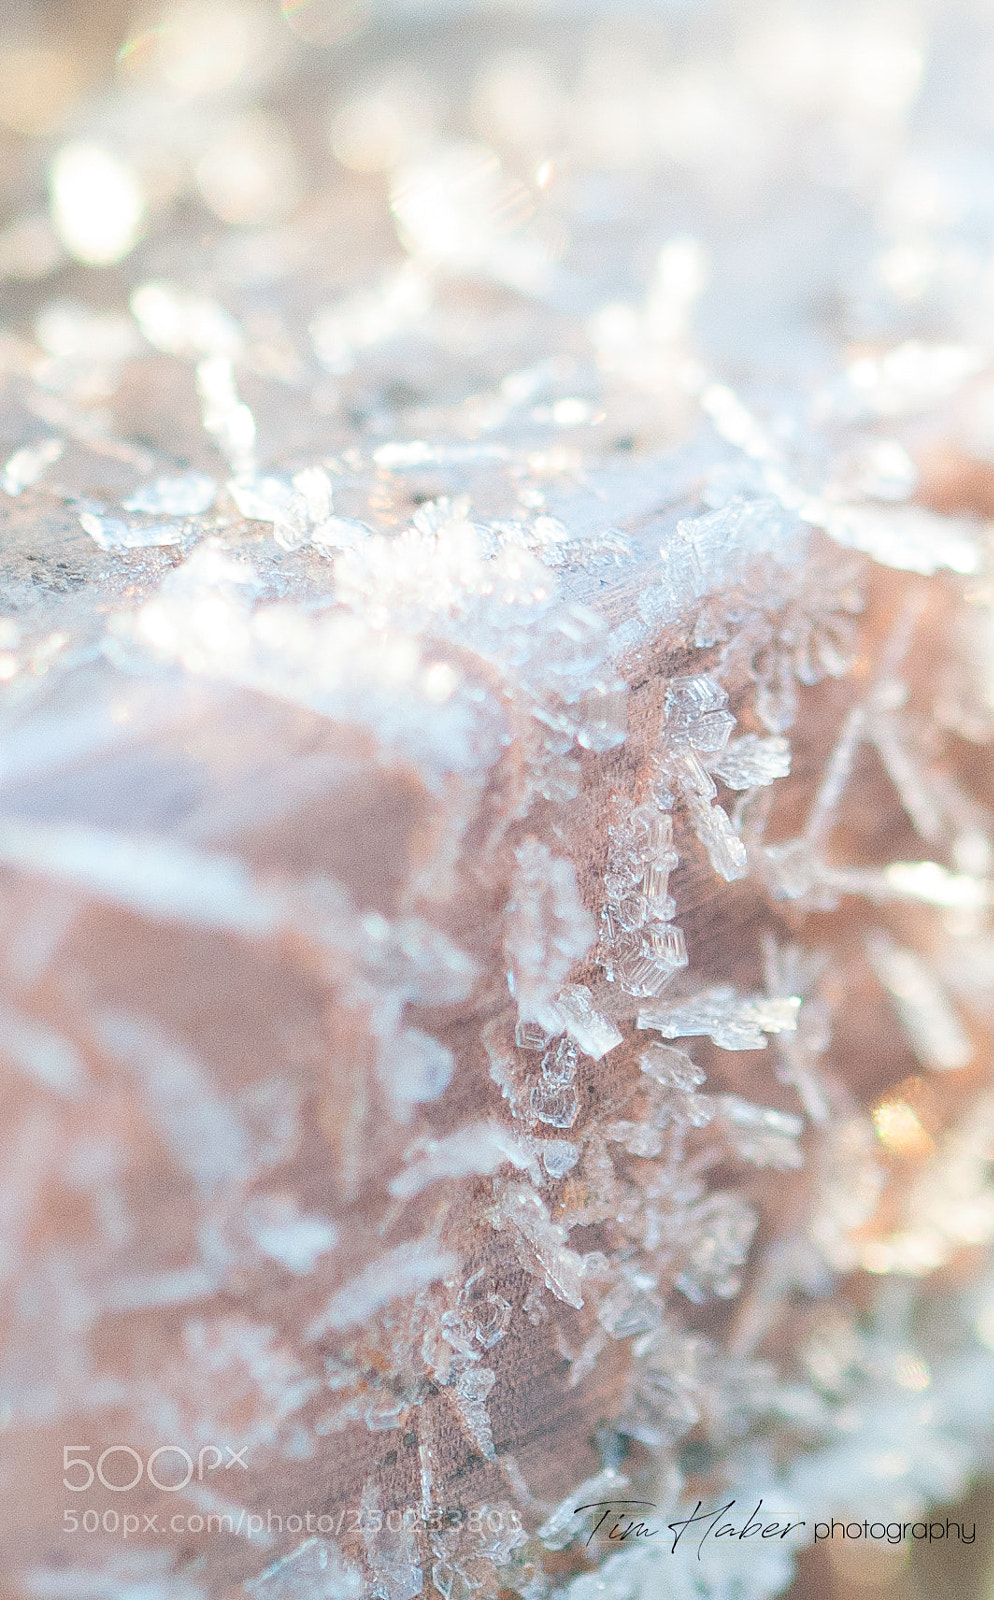 Nikon D90 sample photo. Flow of ice crystals photography